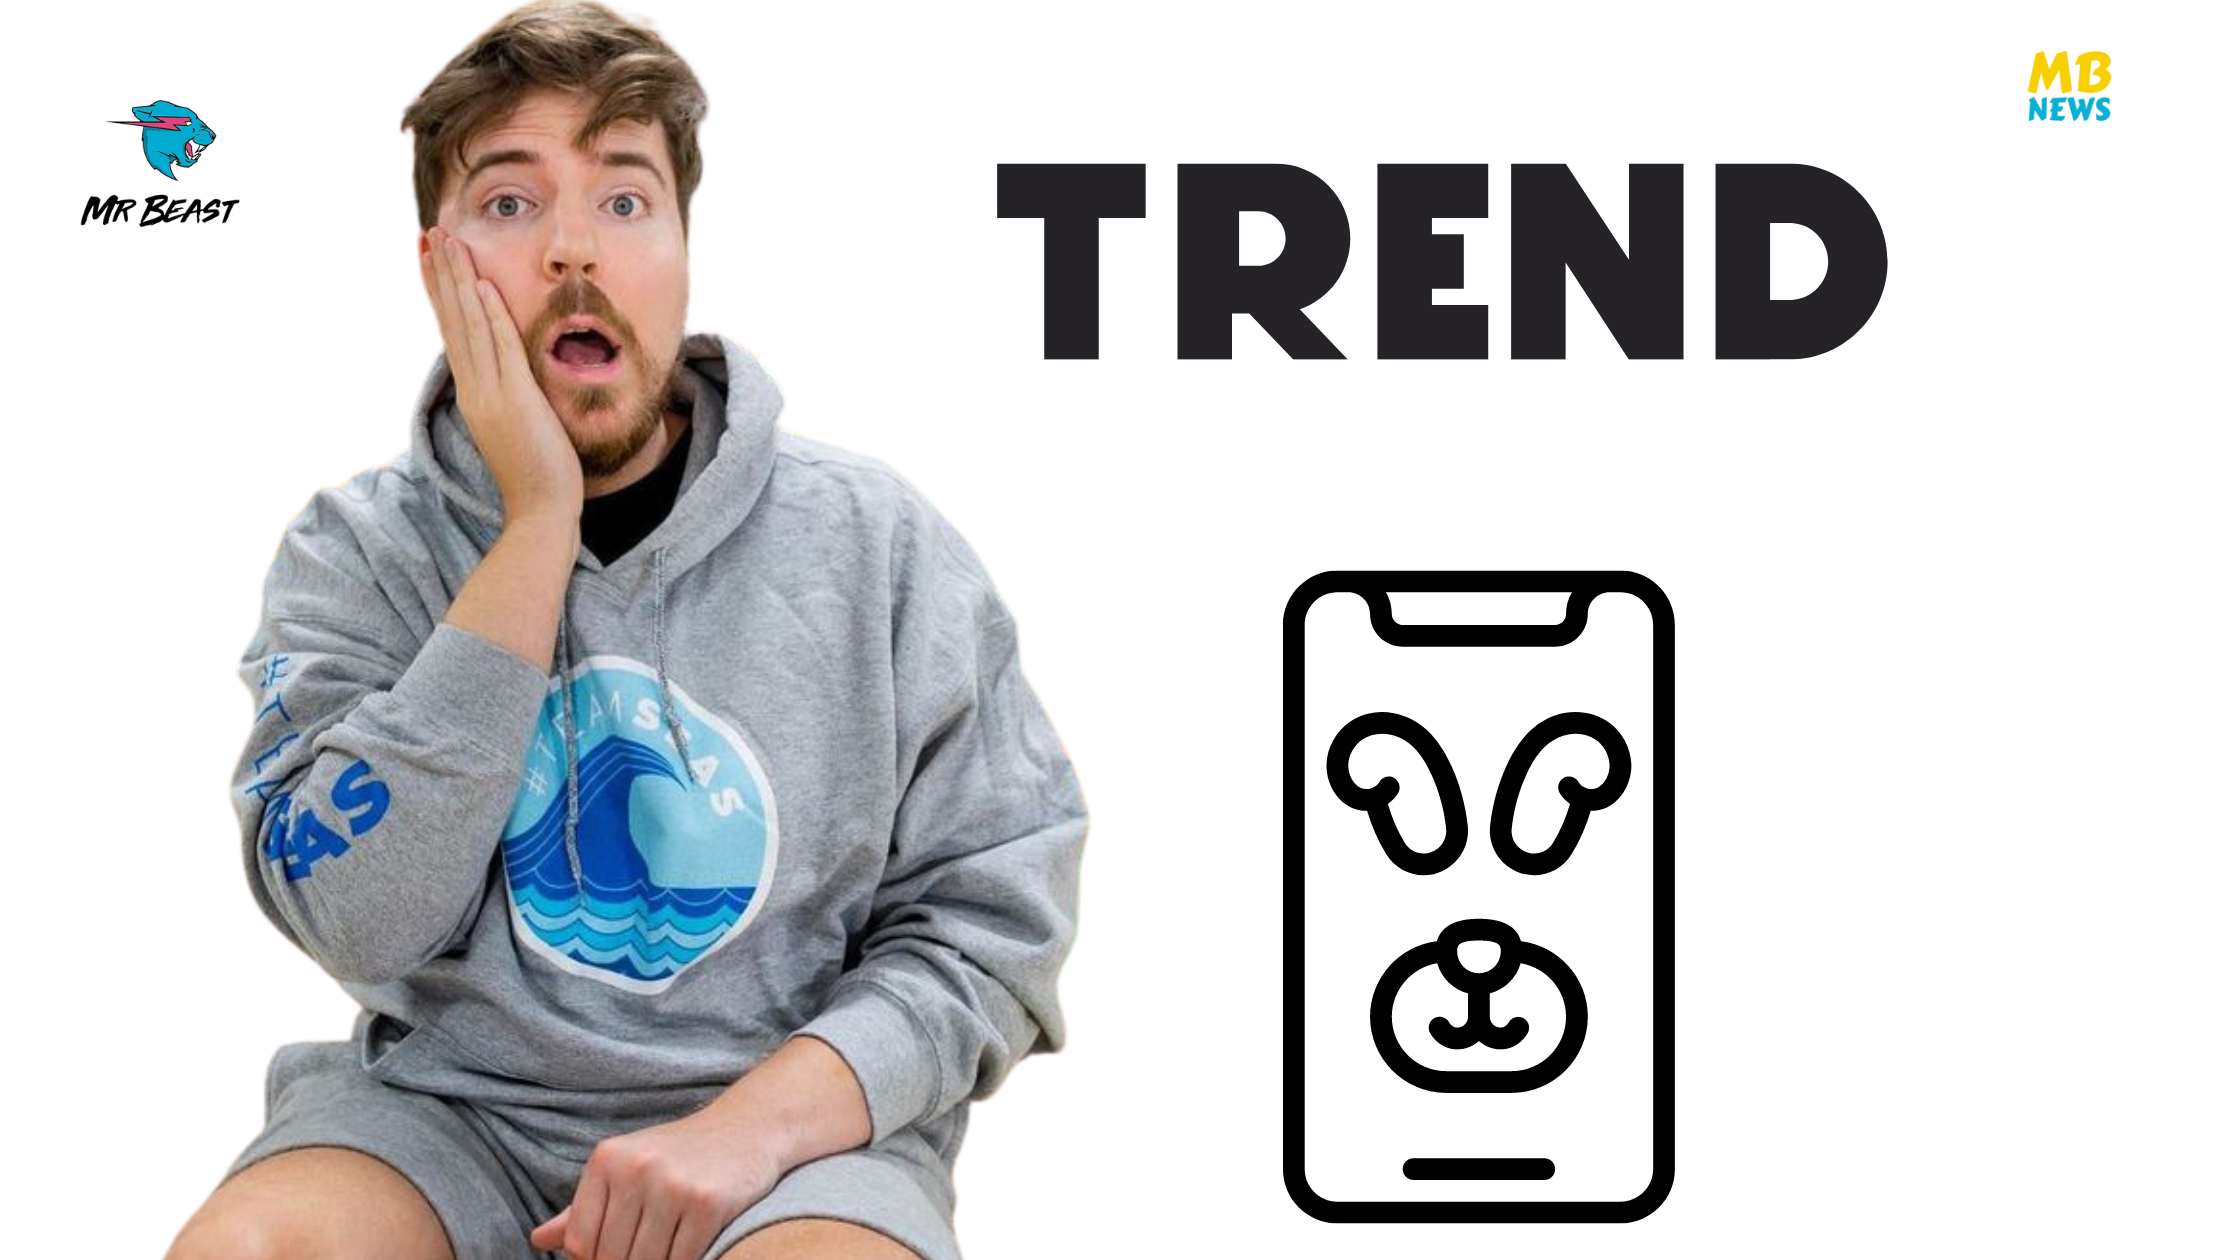 MrBeast Expresses Puzzlement Over Viral Trend Of His Face Filter: 'I’m Not Quite Sure Why This Became a Trend?